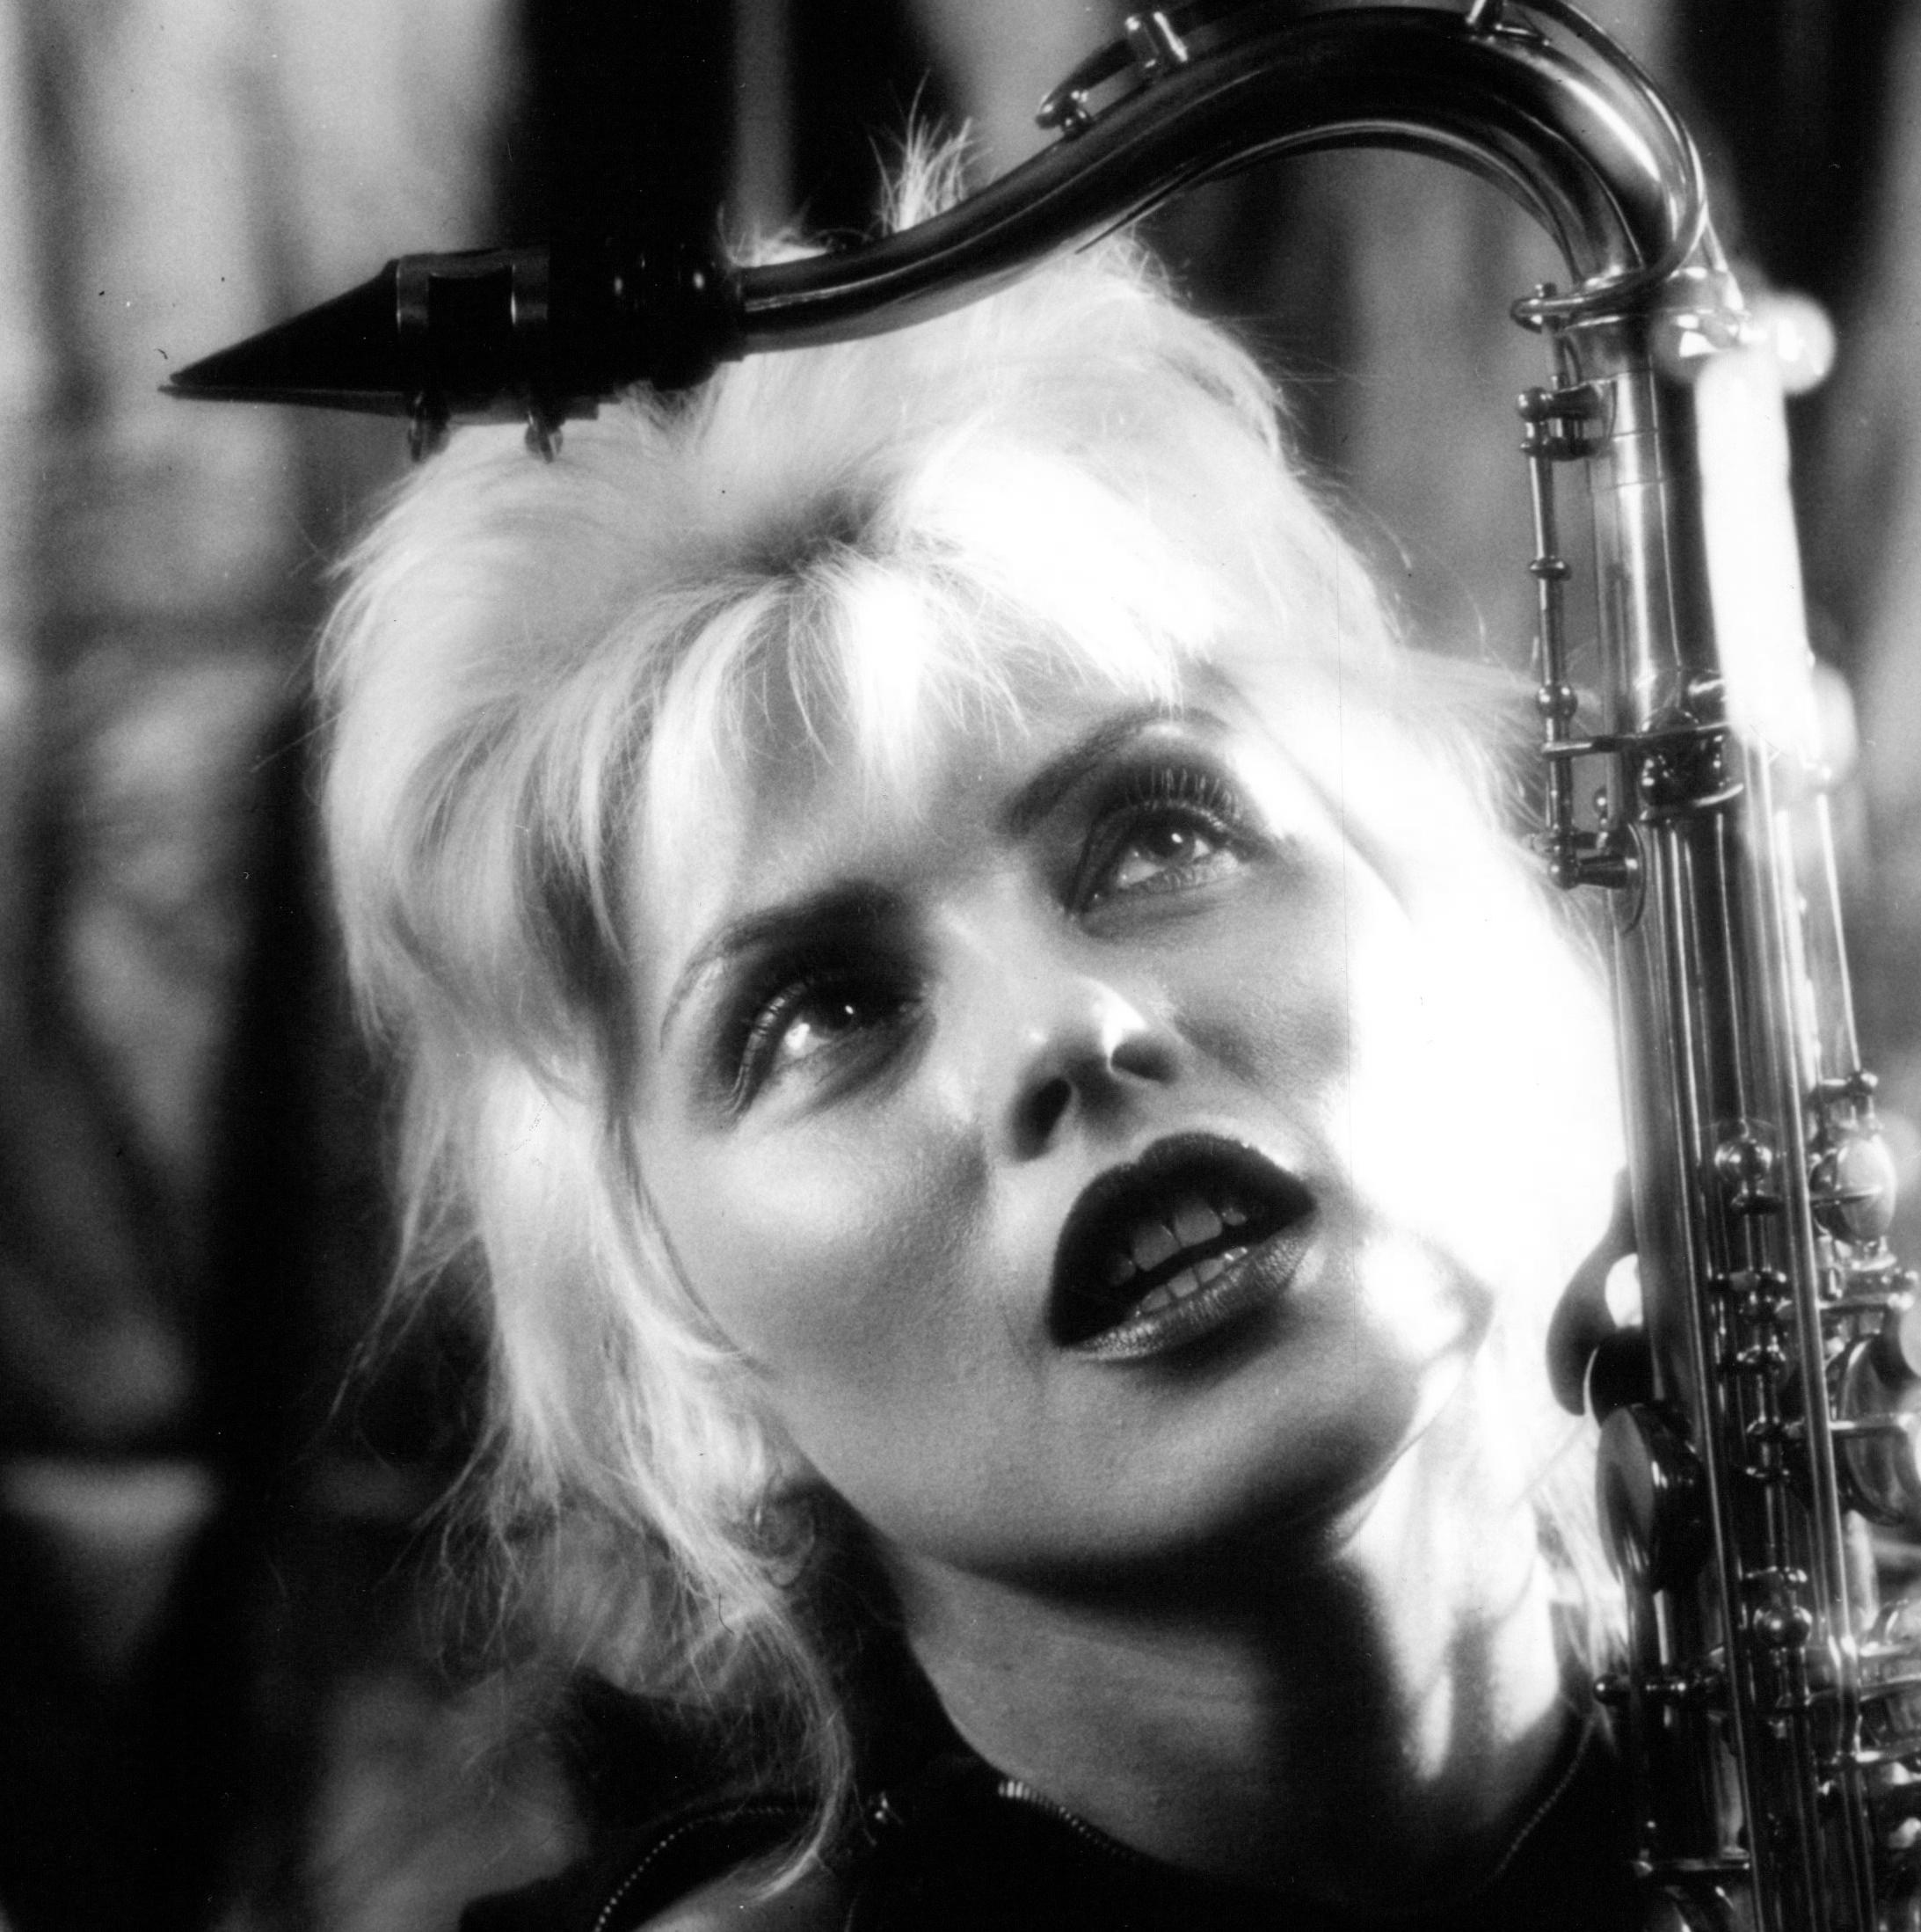 Unknown Black and White Photograph – Debbie Harry of Blondie with Saxophone Vintage Original Photograph